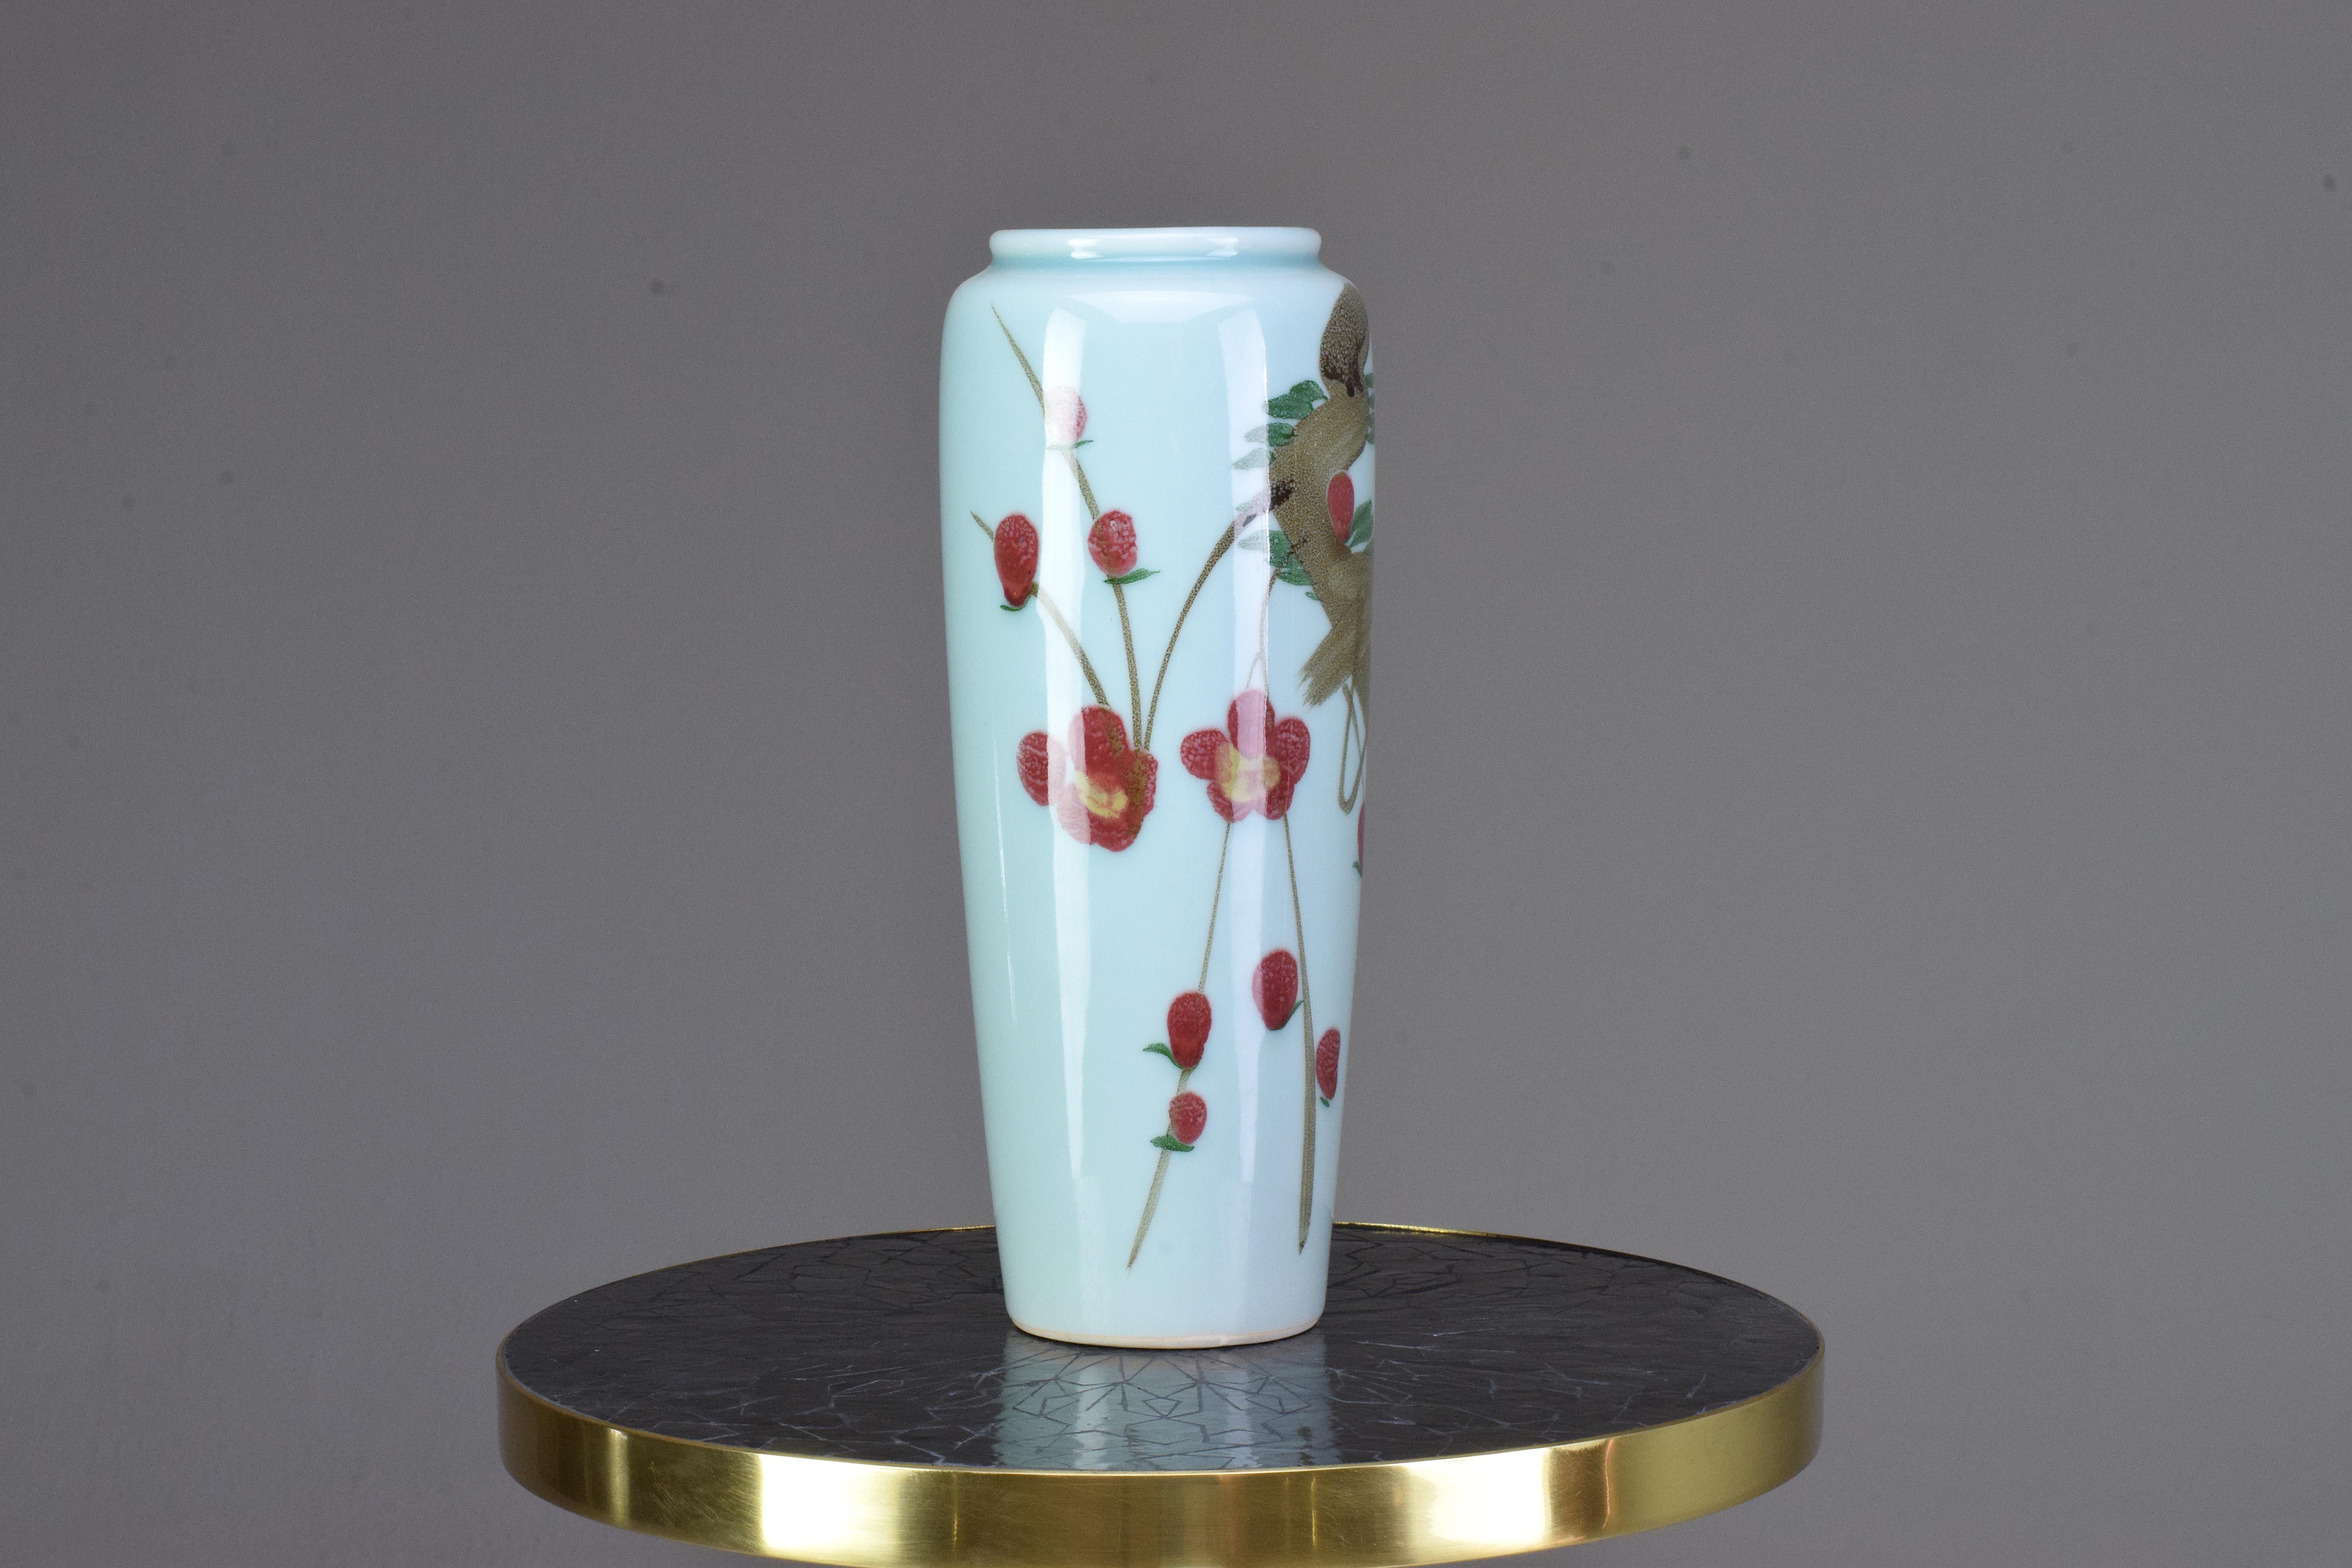 A late 20th century Chinese hand painted light blue ceramic vase with red flower patterns.
Signed at the bottom with the name of a famous mountain in China.



----------------------
We are an exhibition space and an online destination established